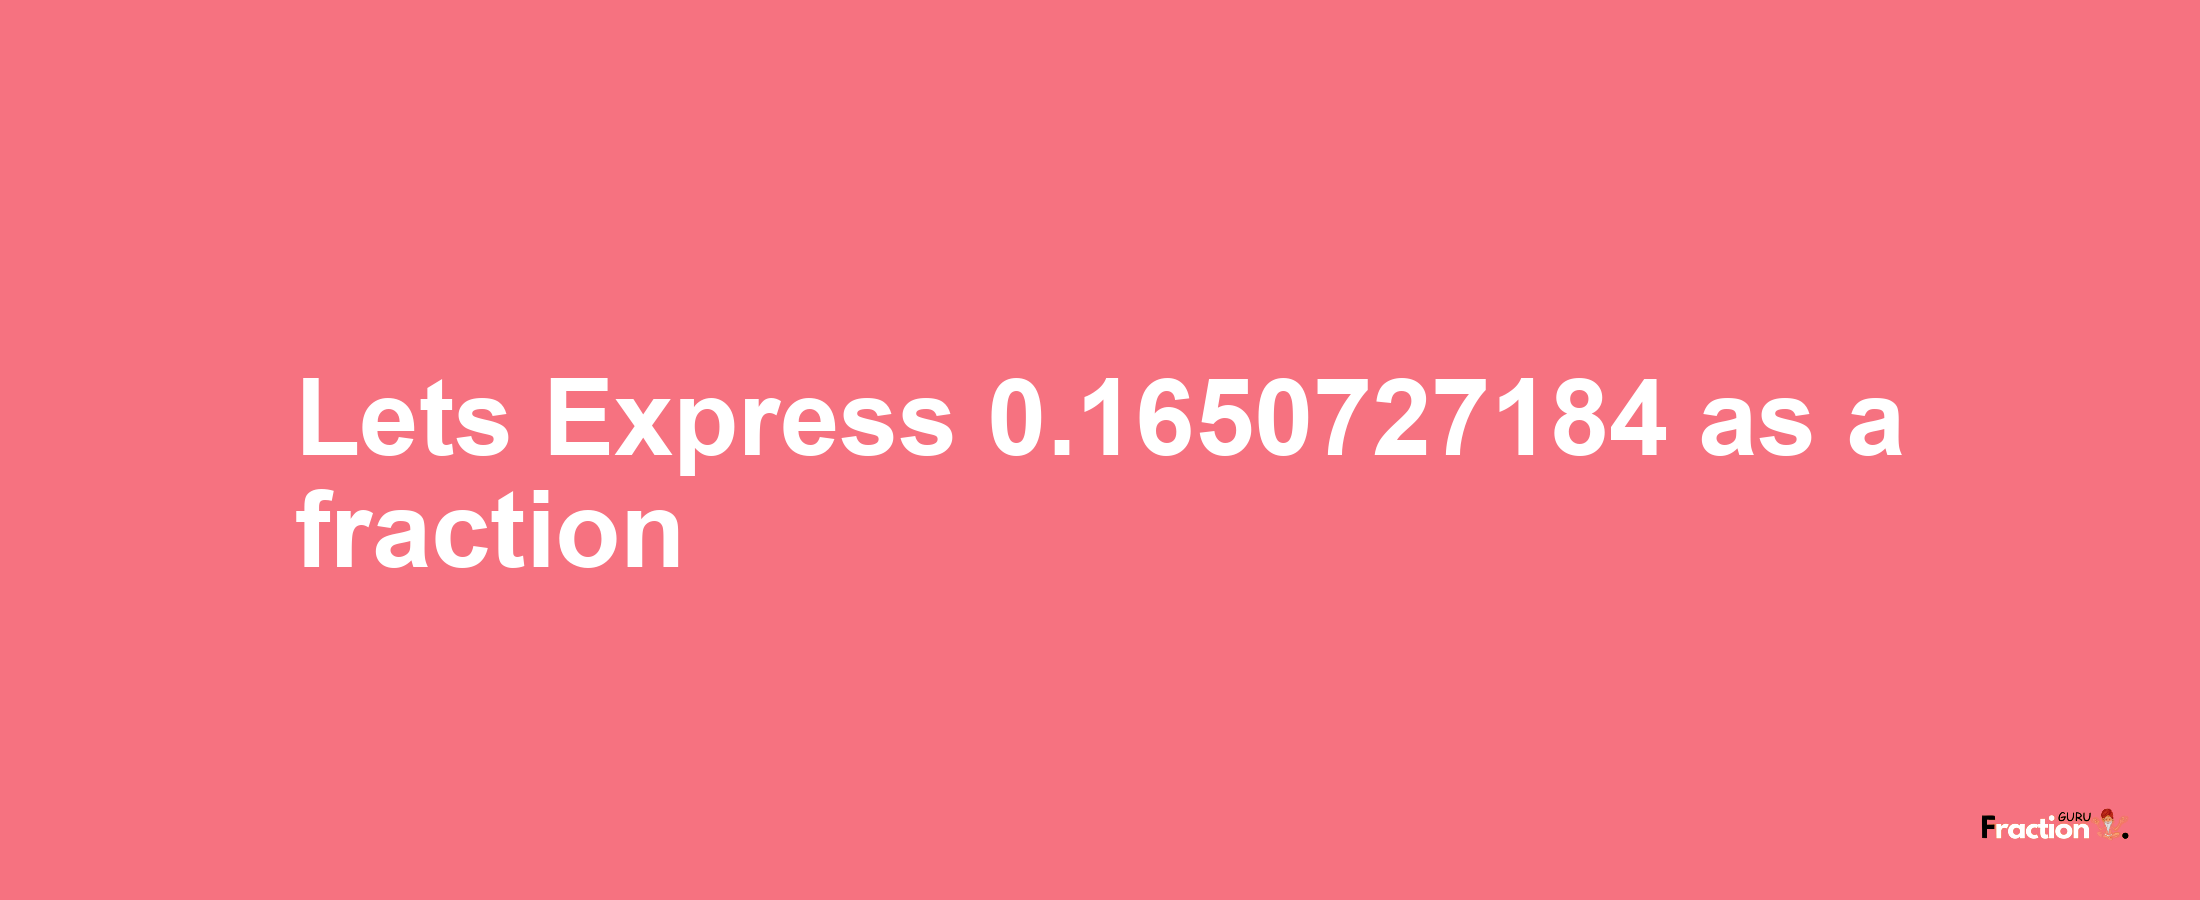 Lets Express 0.1650727184 as afraction